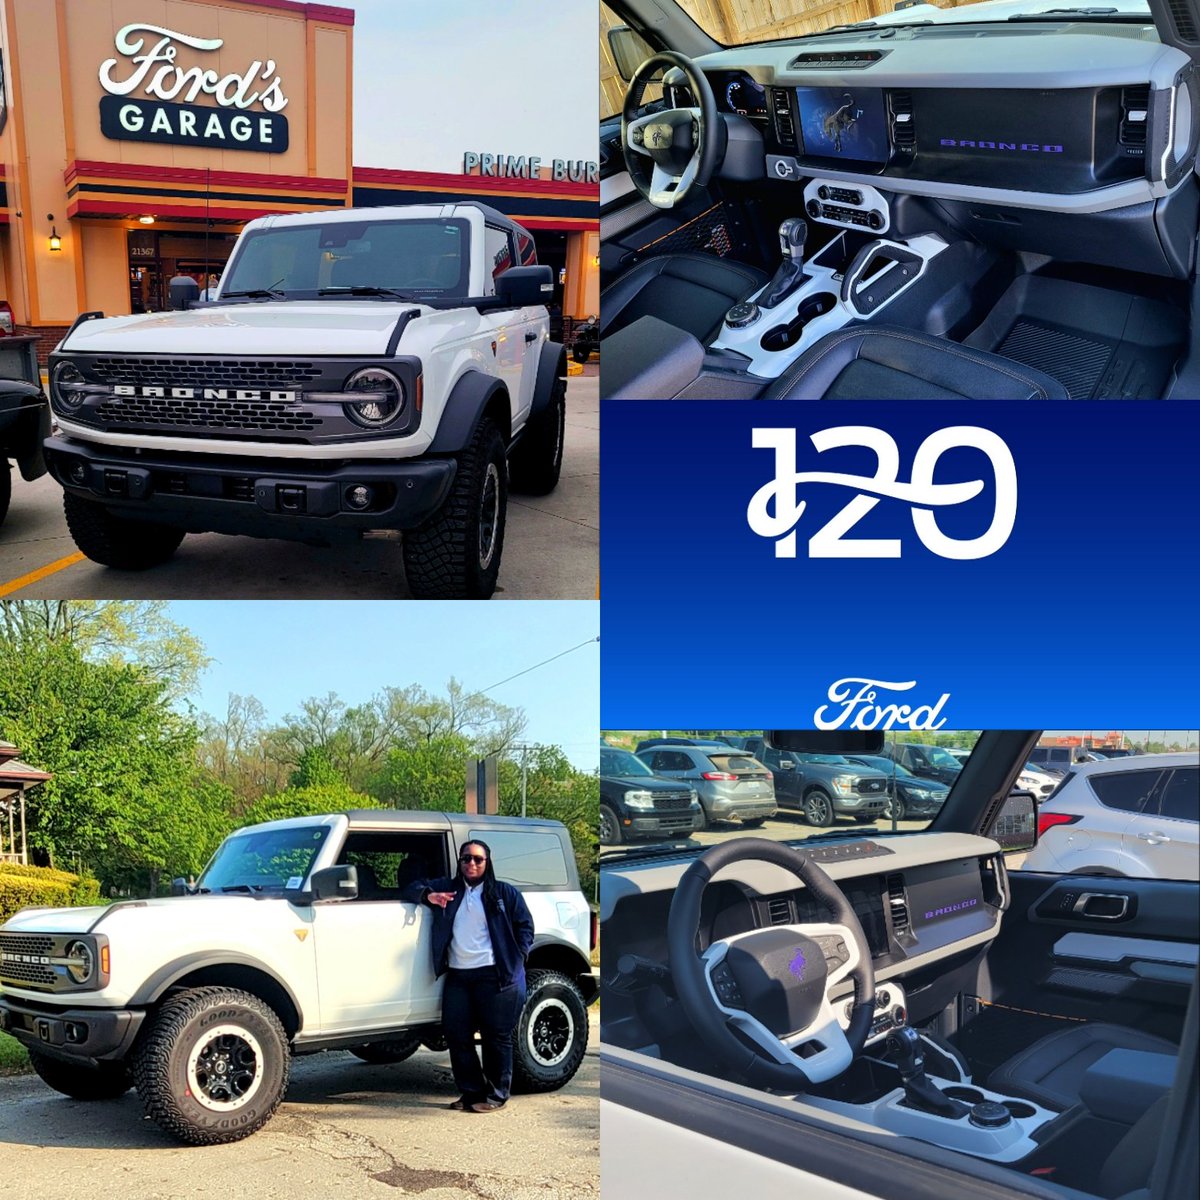 Happy 120 Years, Ford! I Love Working For A Company That Allows Me To Be As Unique As My Bronco! #Ford120 #120Ford #WeAreFord #Ford #FordMotorCompany